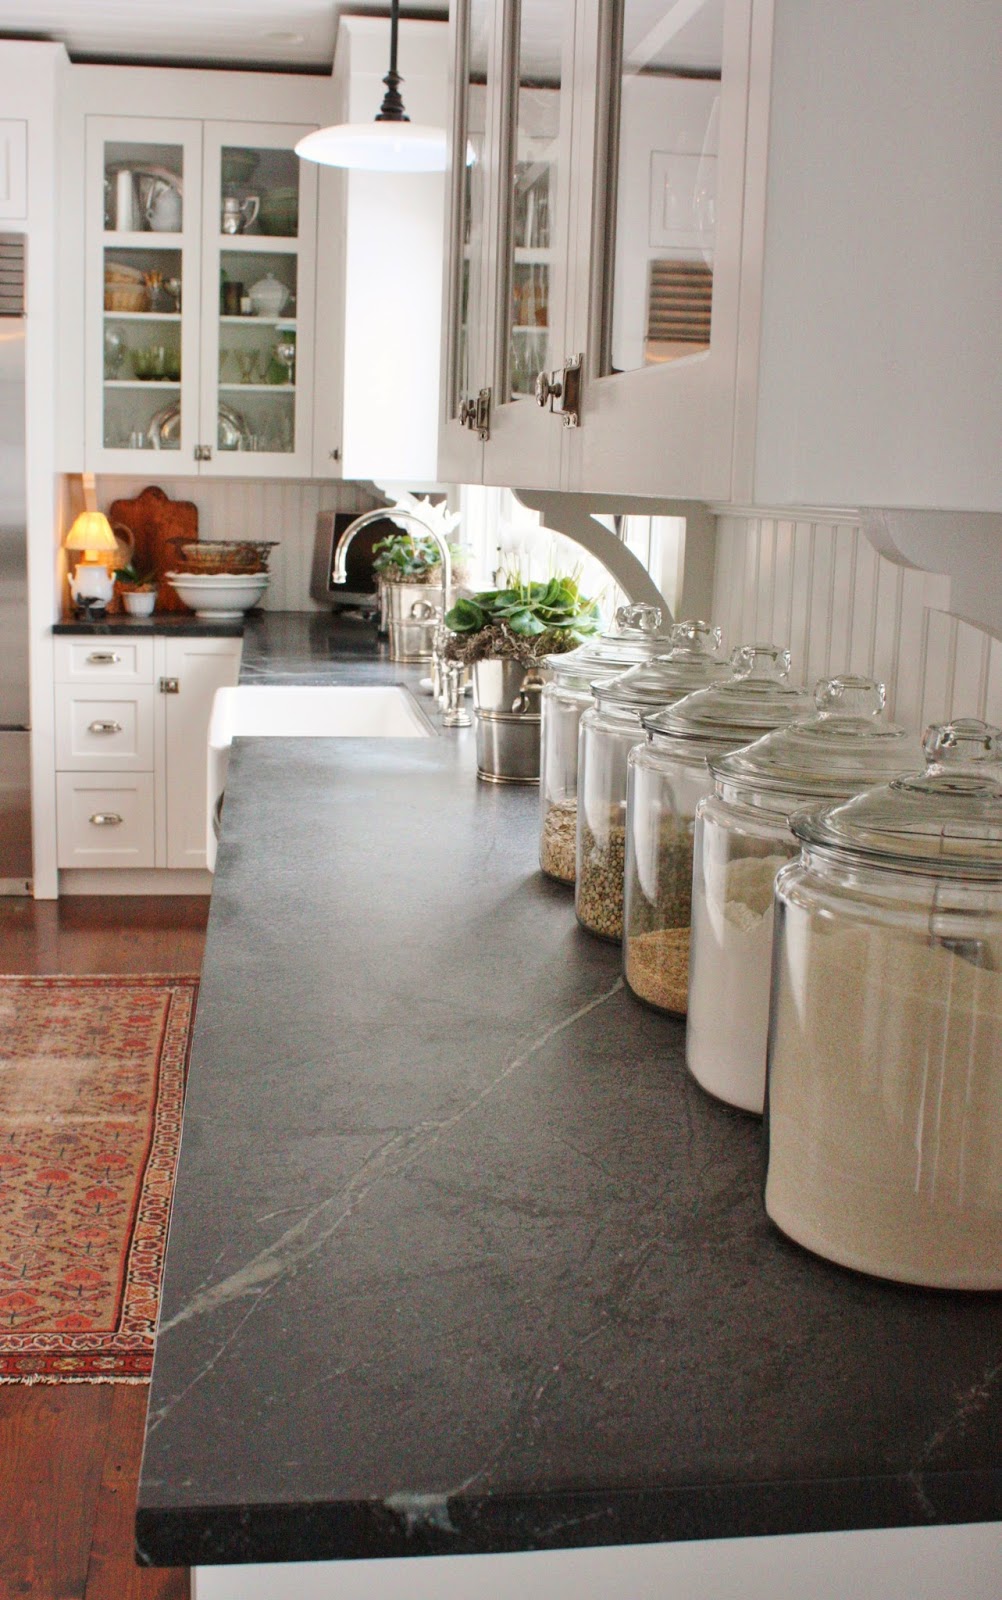 The Kitchen Counters When You Are Thinking Concrete And Your